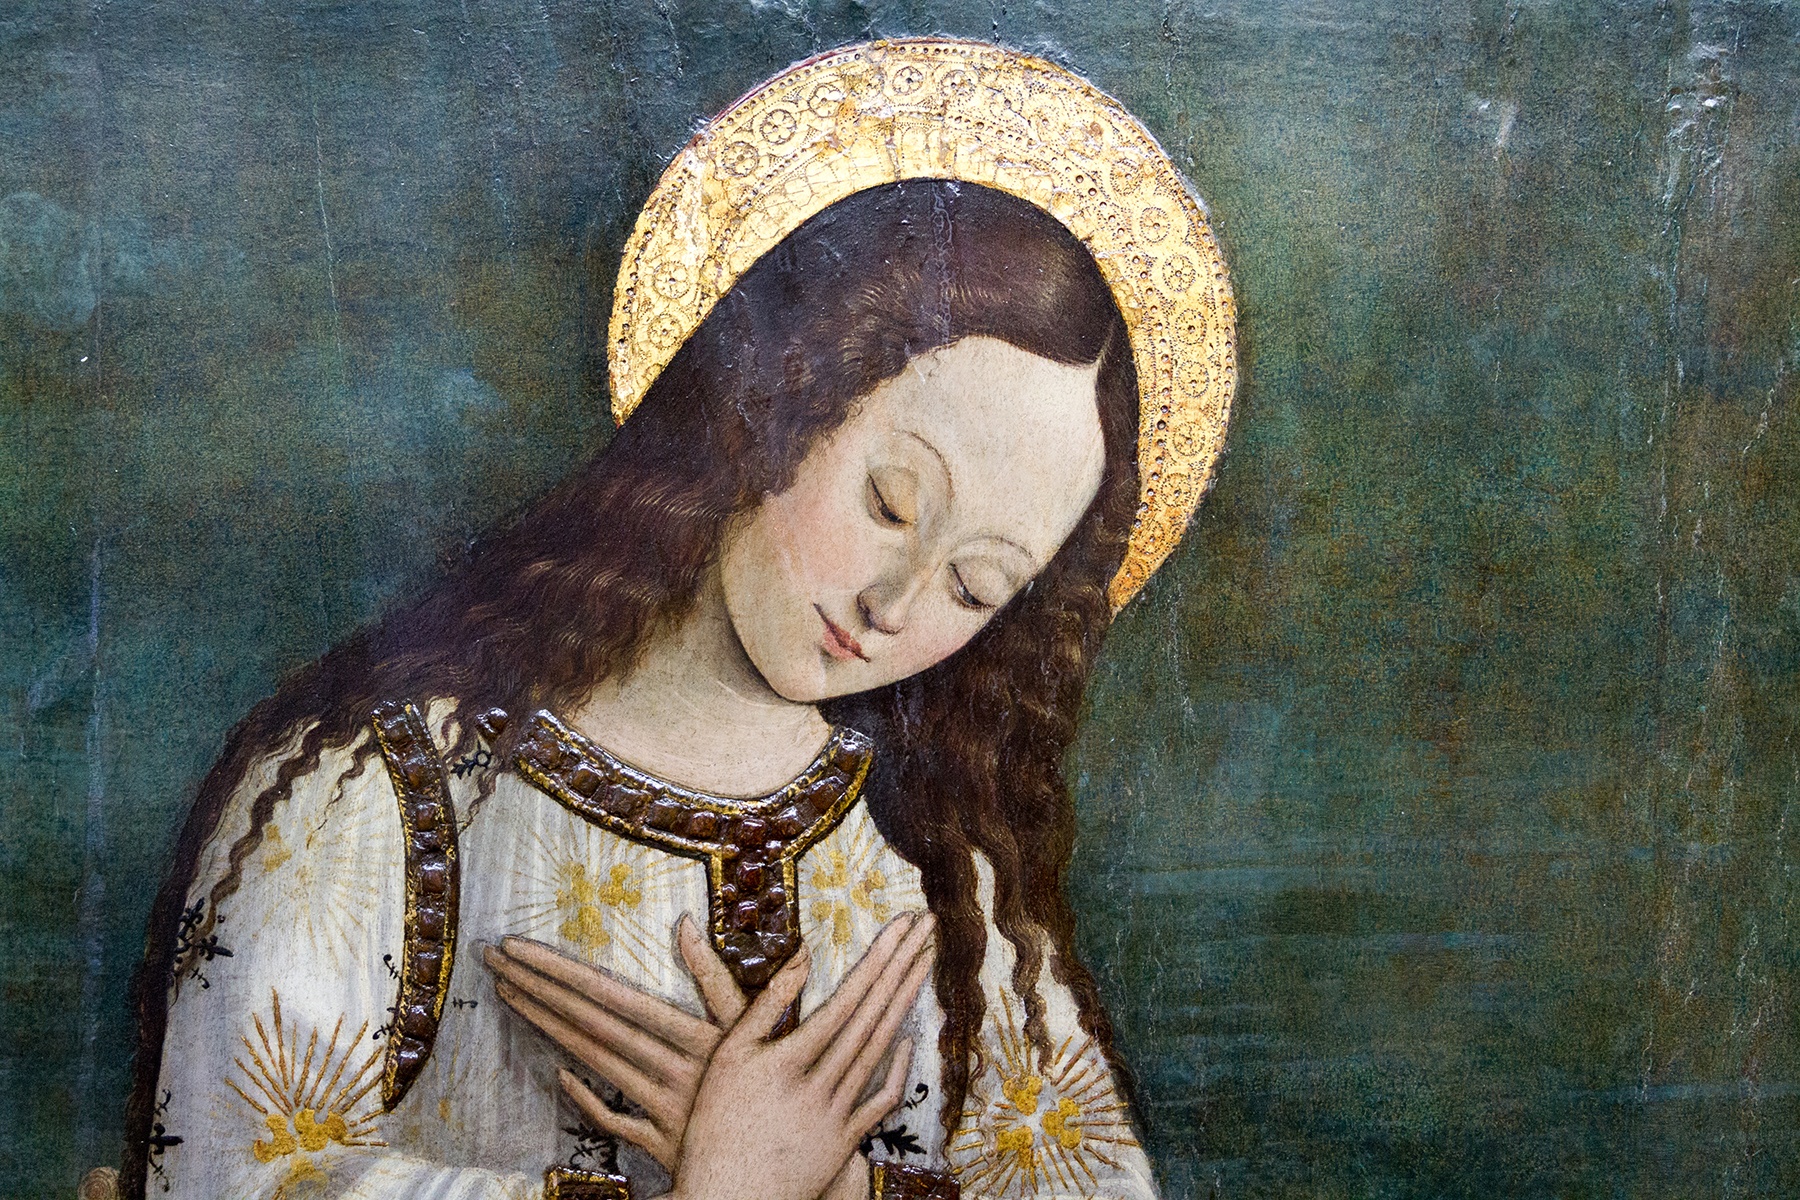 The Blessed Virgin Mary • Monthly devotion for May